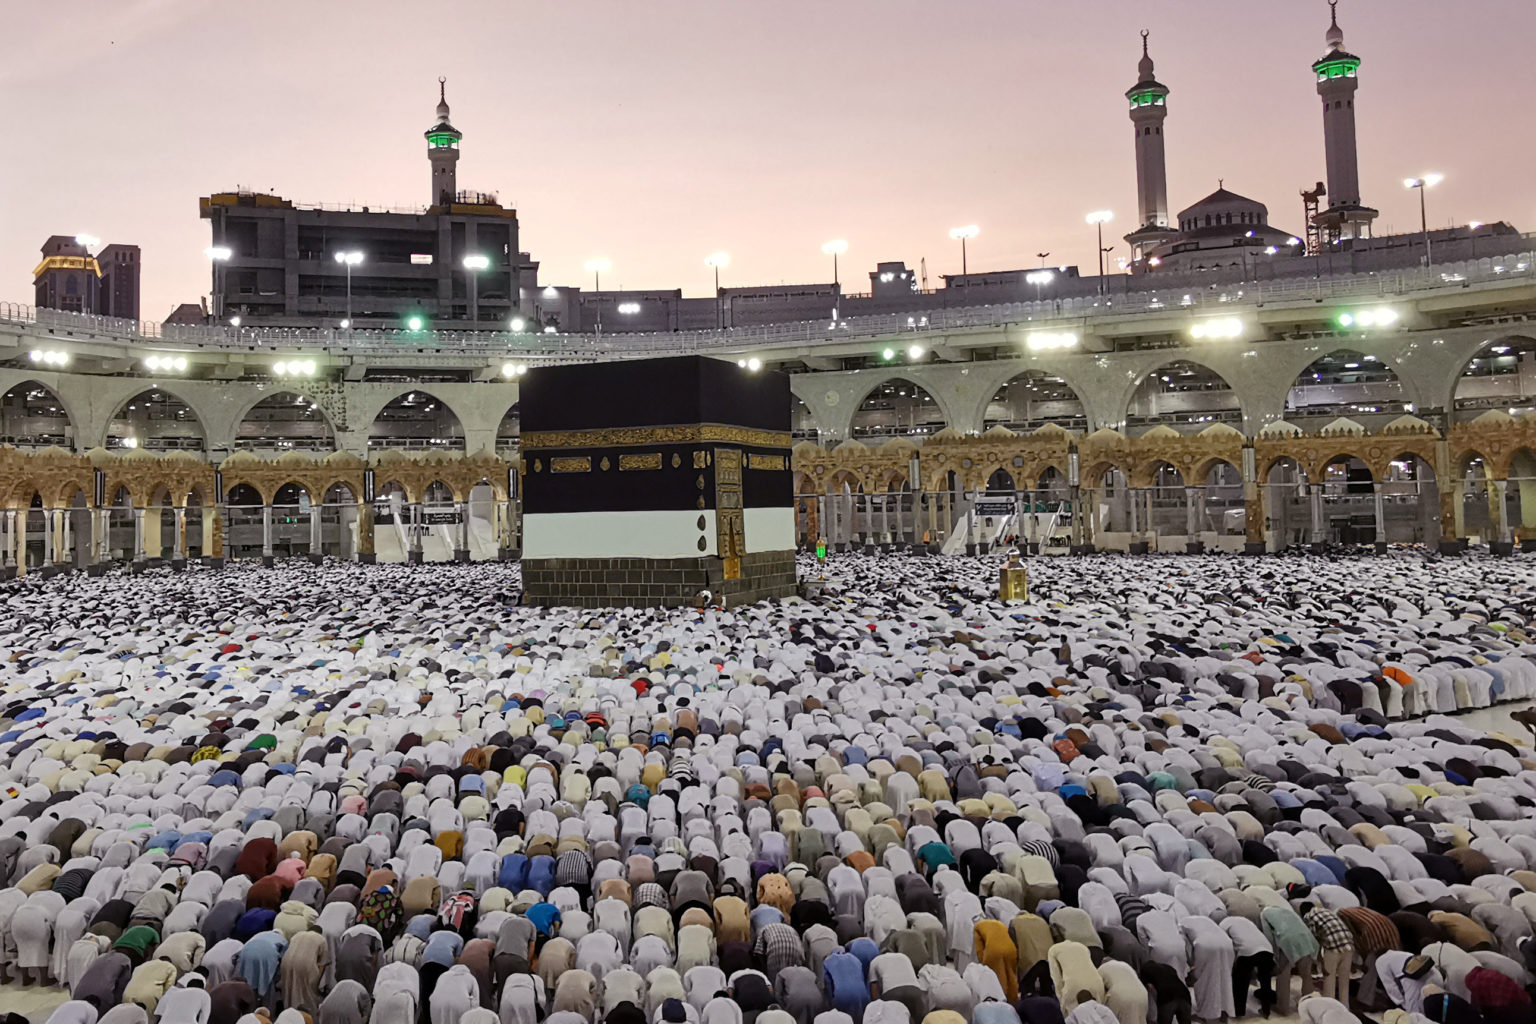 Muslims pray at the Kabbah during the annual Hajj pilgrimage in their holy city of Mecca, Saudi Arabia